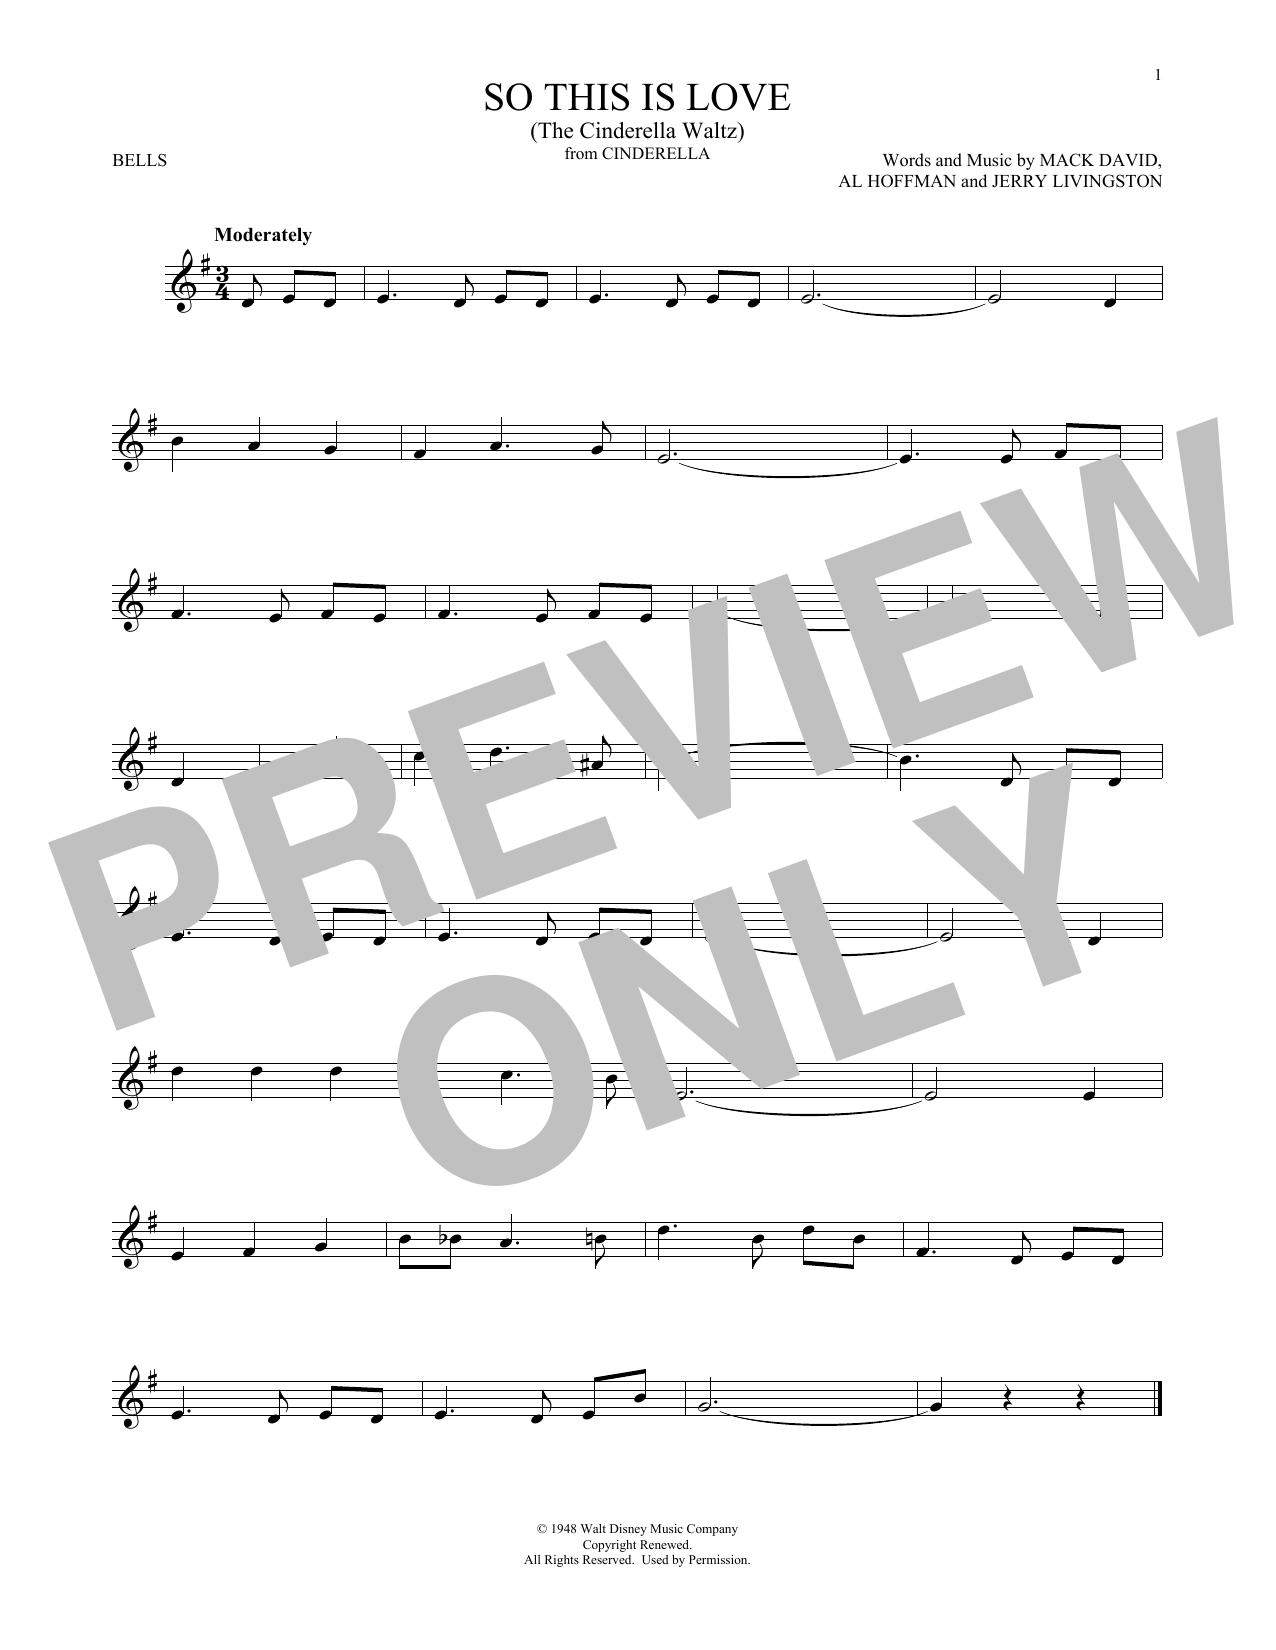 Download Mack David, Al Hoffman and Jerry Liv So This Is Love (from Cinderella) Sheet Music